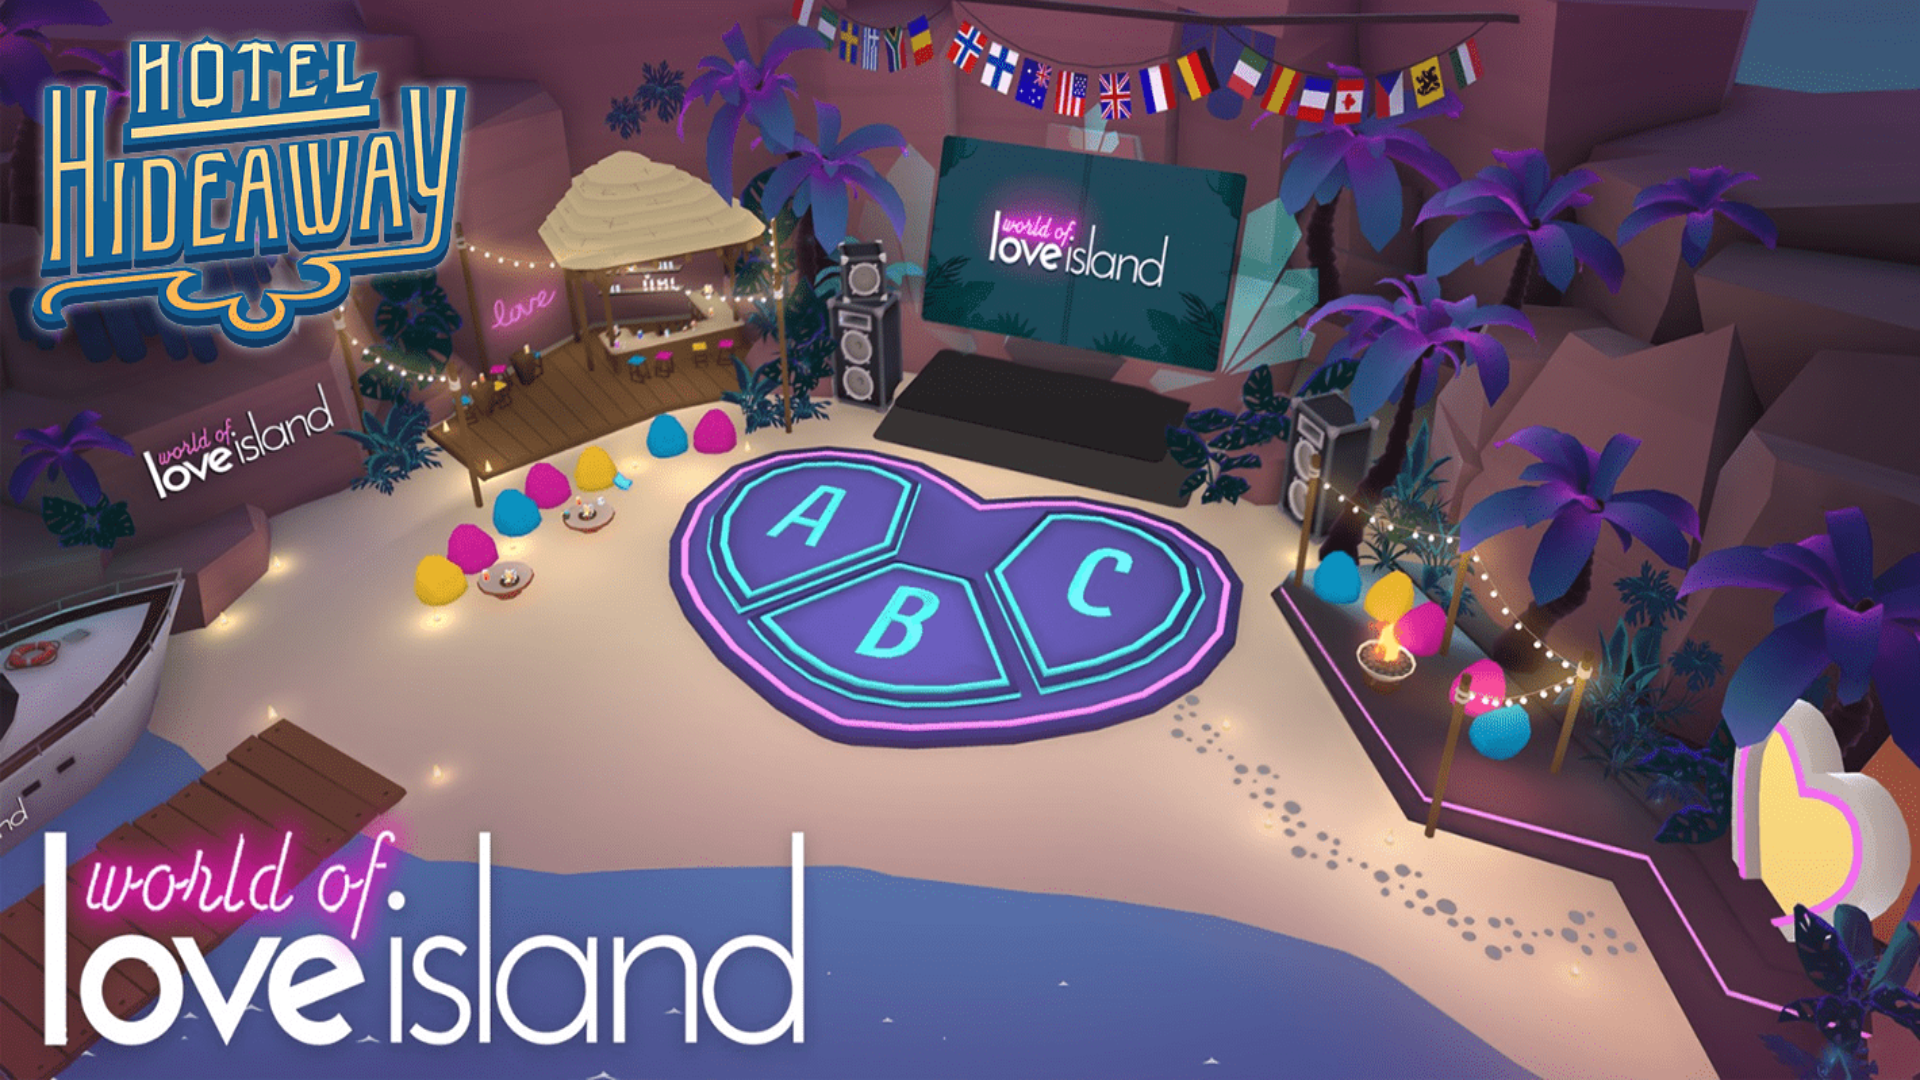 Azerion, ITV Studios' 'Love Island' to Expand Hotel Hideaway Deal | licenseglobal.com